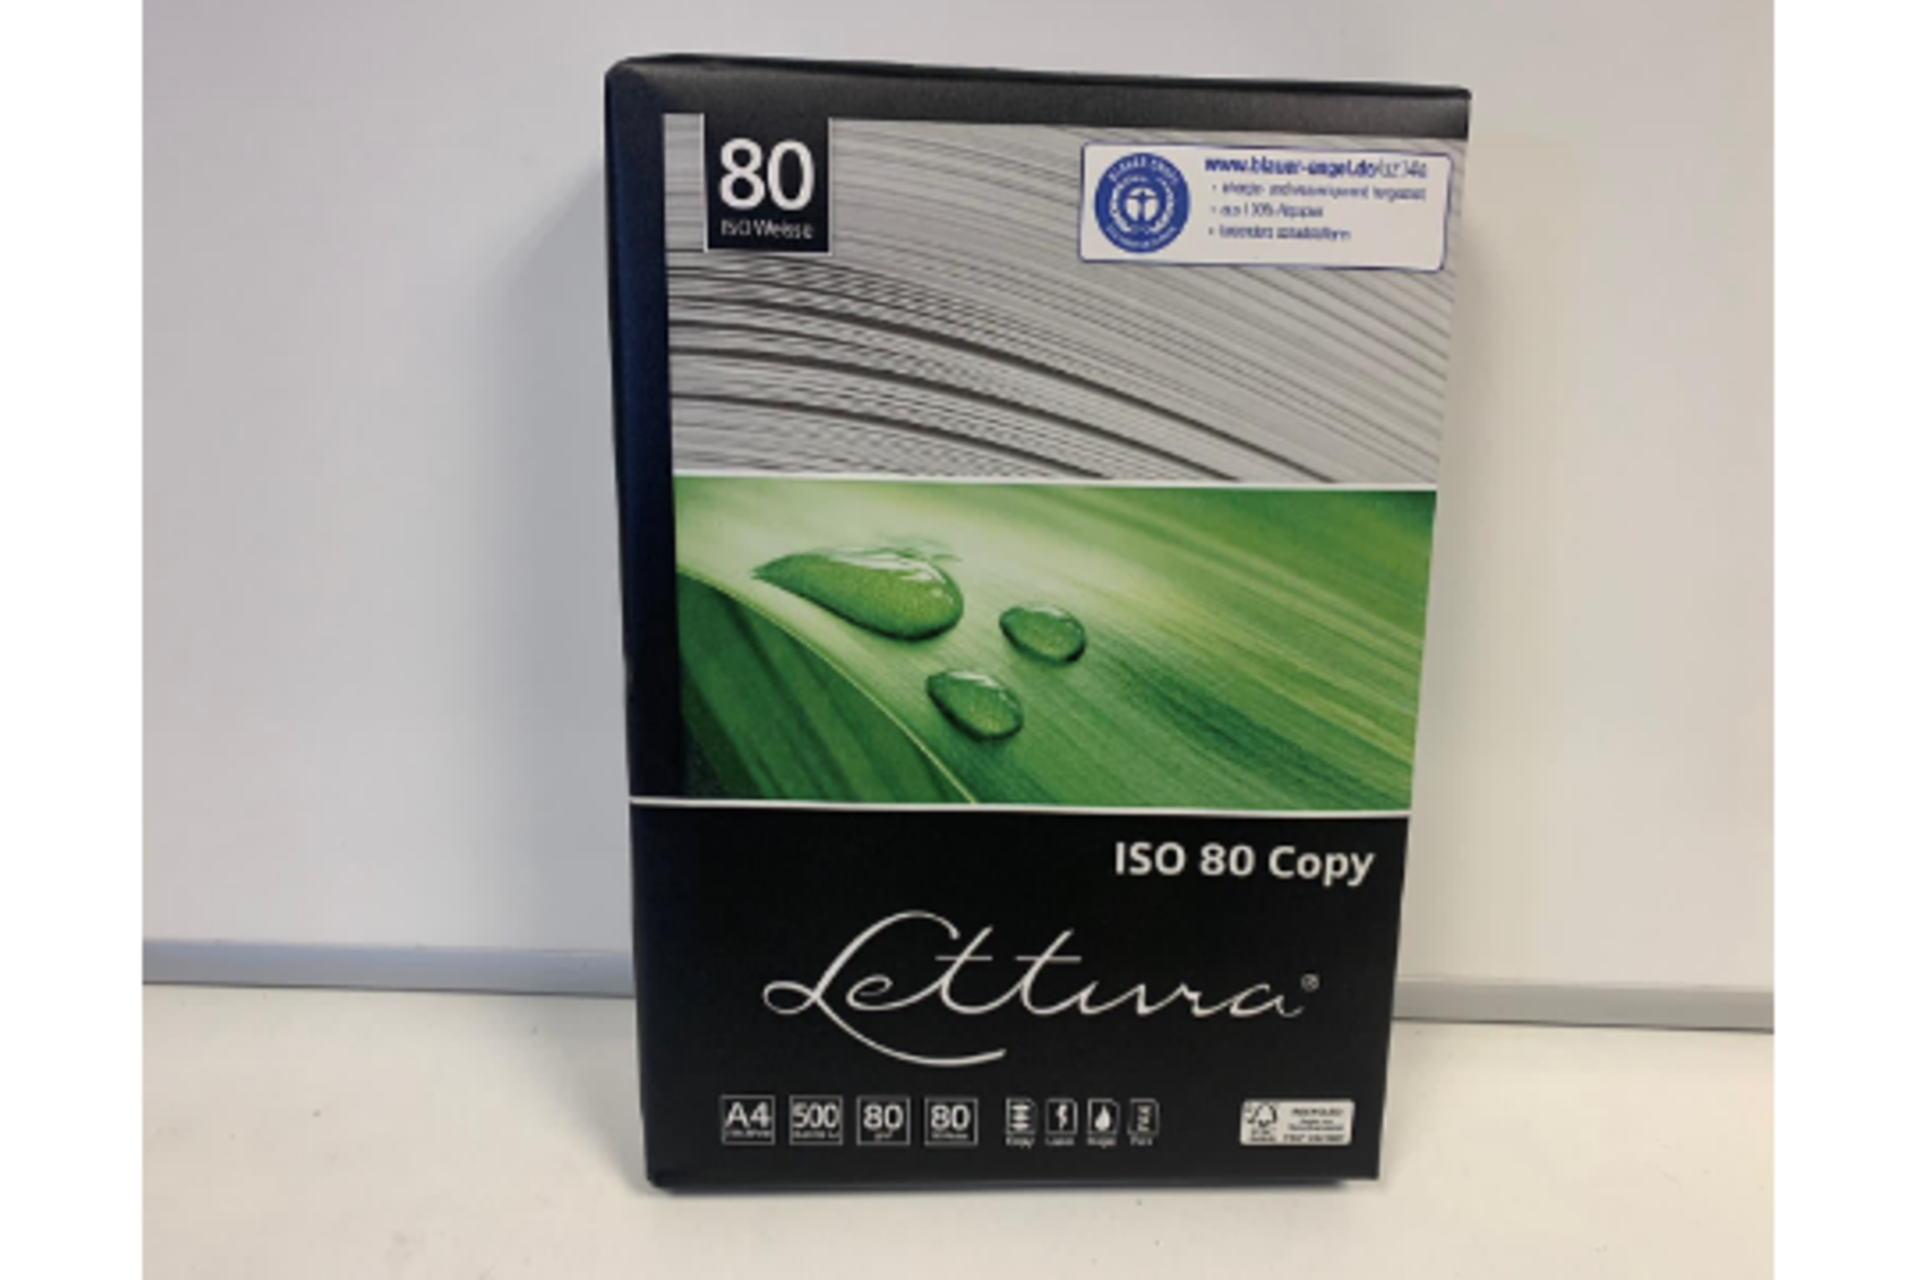 20 X PACKS OF 500 LETTURA A4 PAPER (10,000 SHEETS TOTAL )